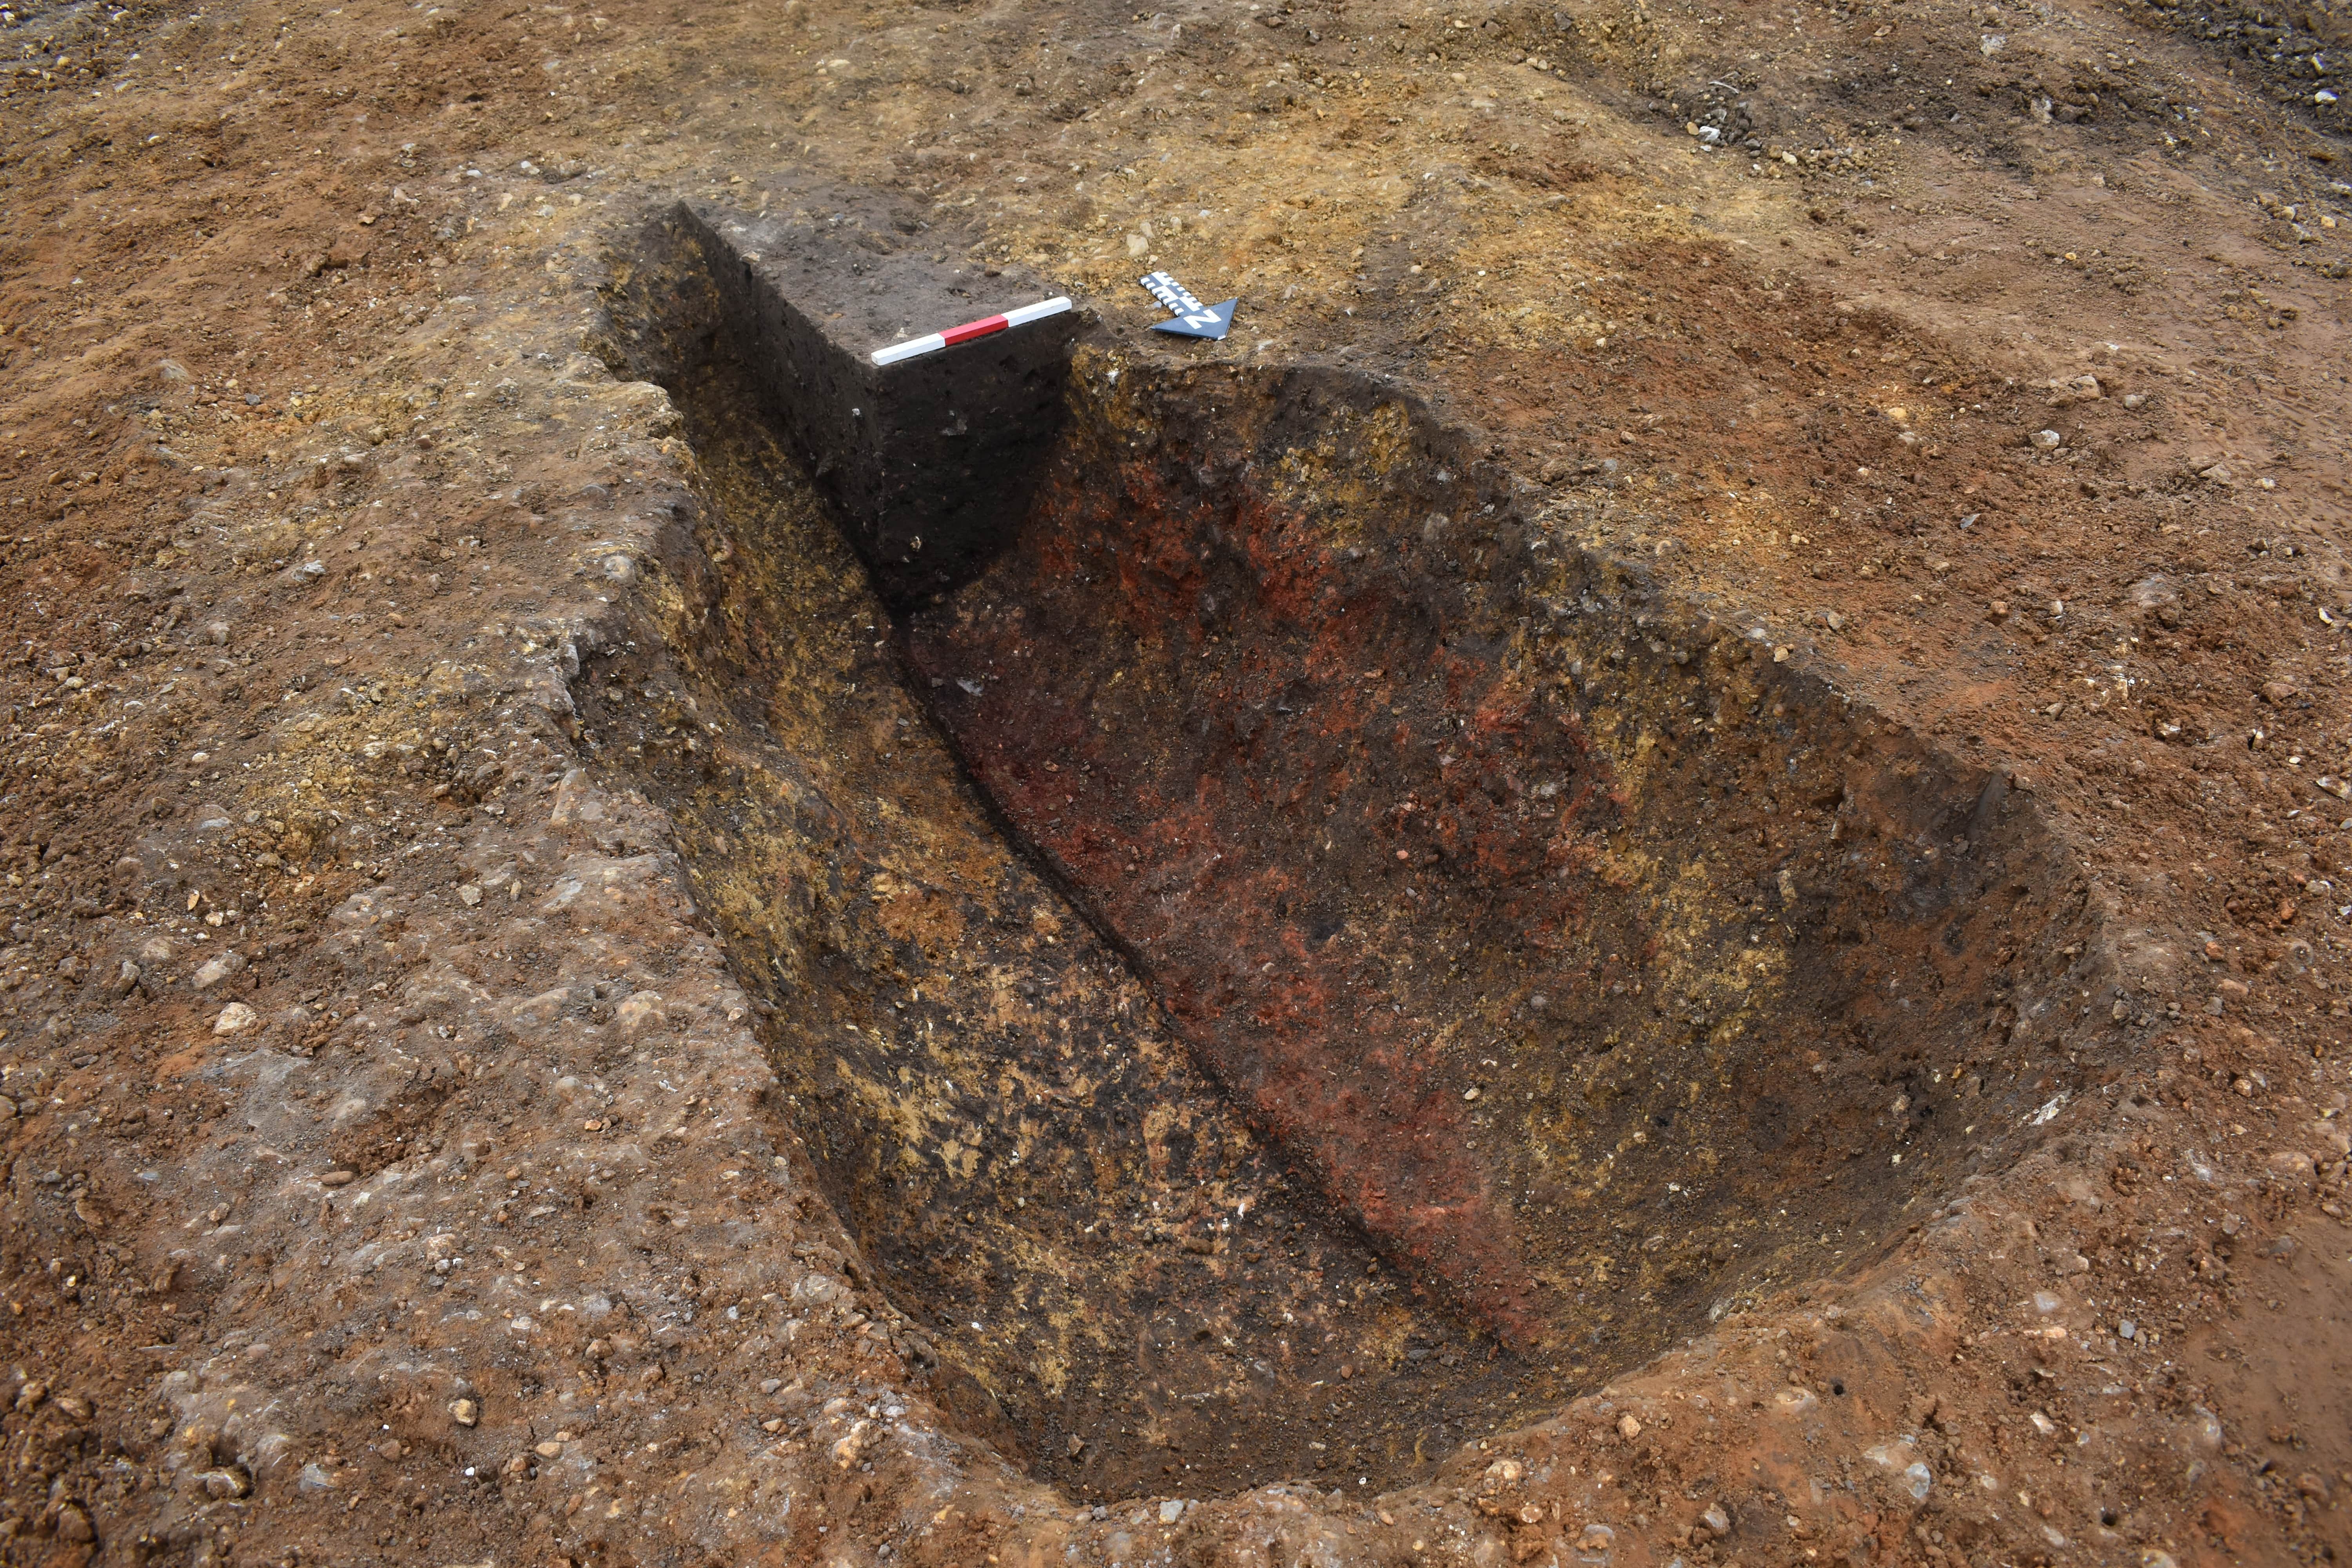 The oven fully excavated, showing the burnt lining.